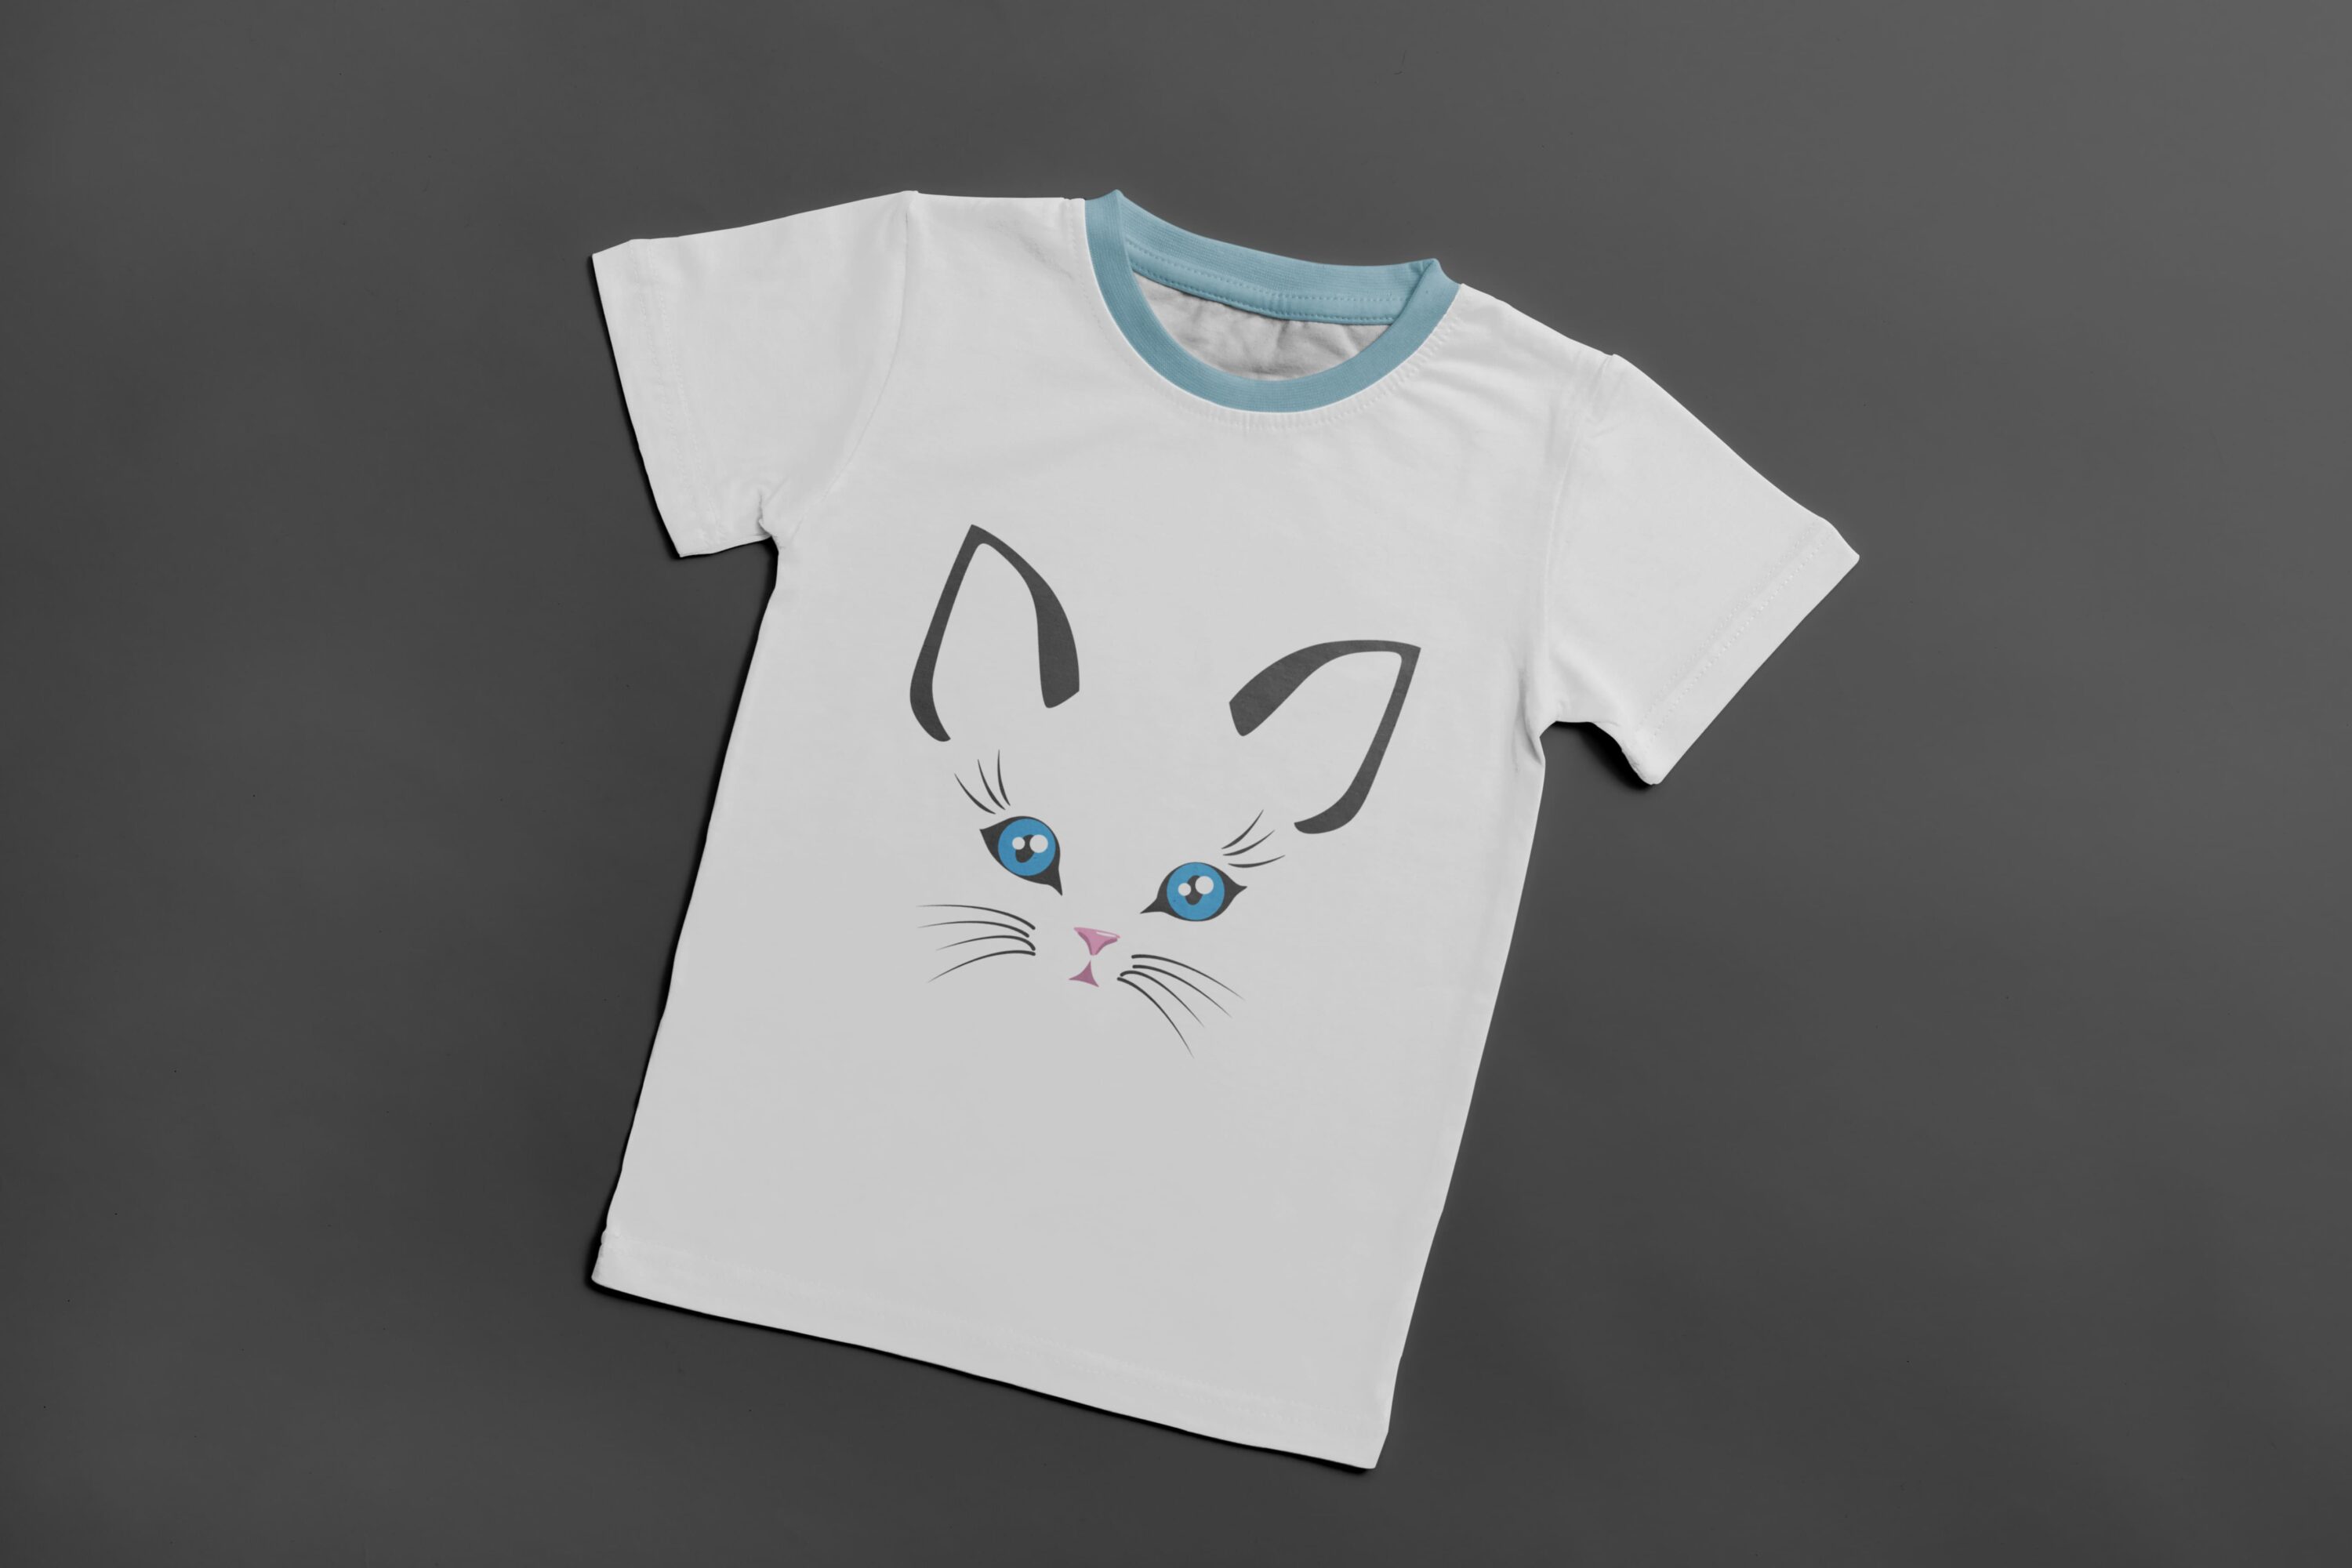 A white t-shirt with a light blue collar and the face of a sad cat with blue eyes.